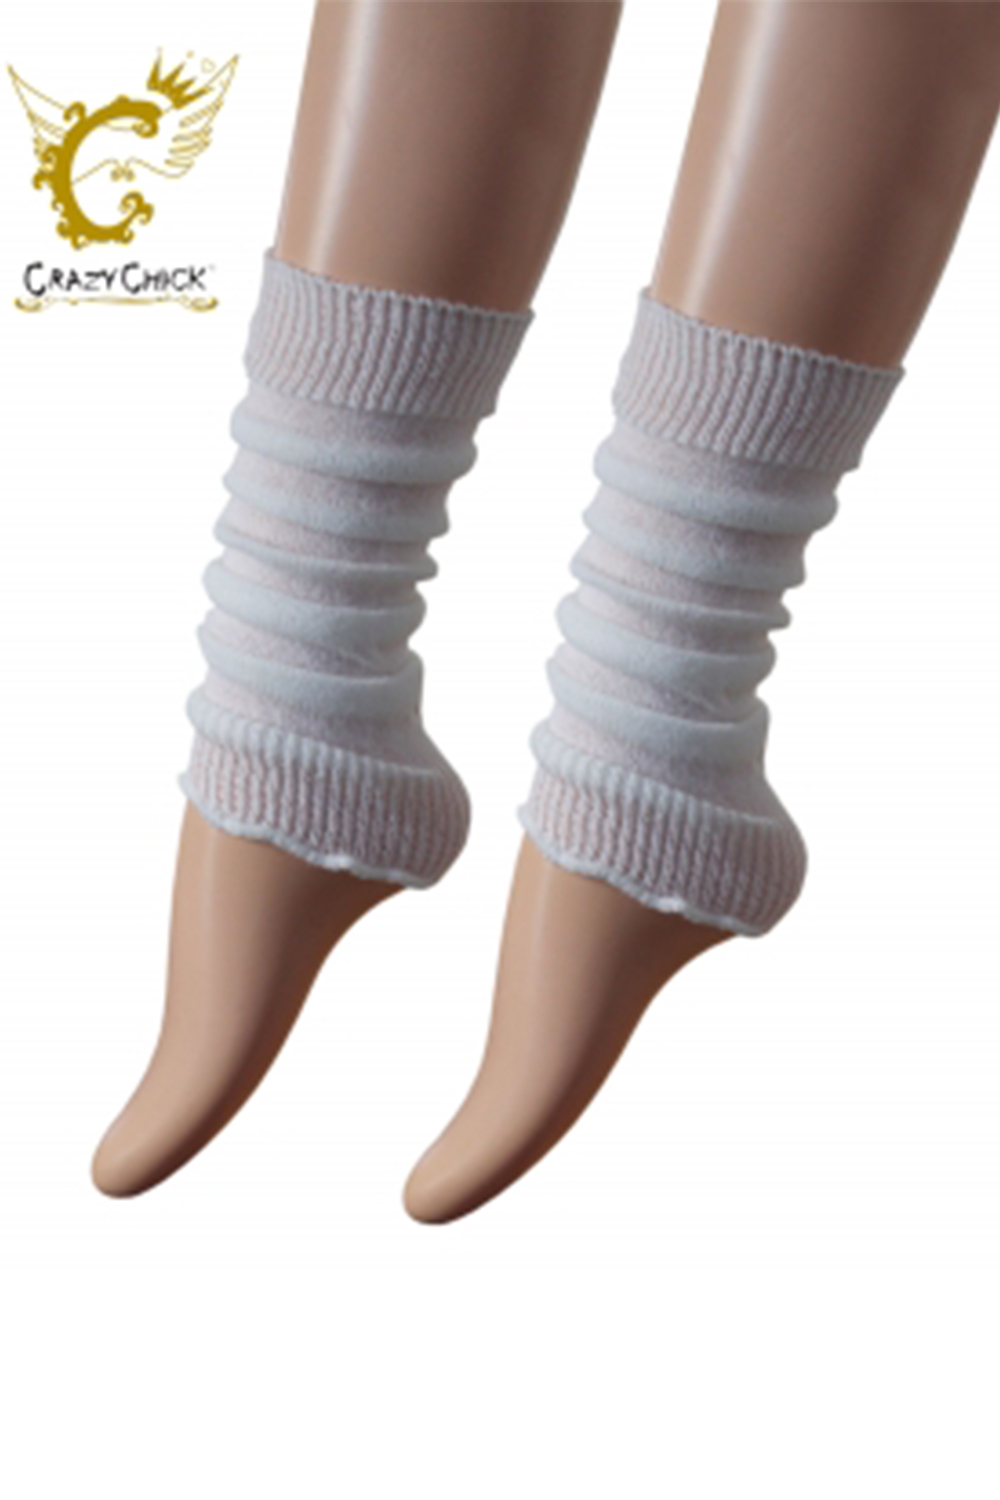 Crazy Chick Girls White Legwarmers (Pack of 12)